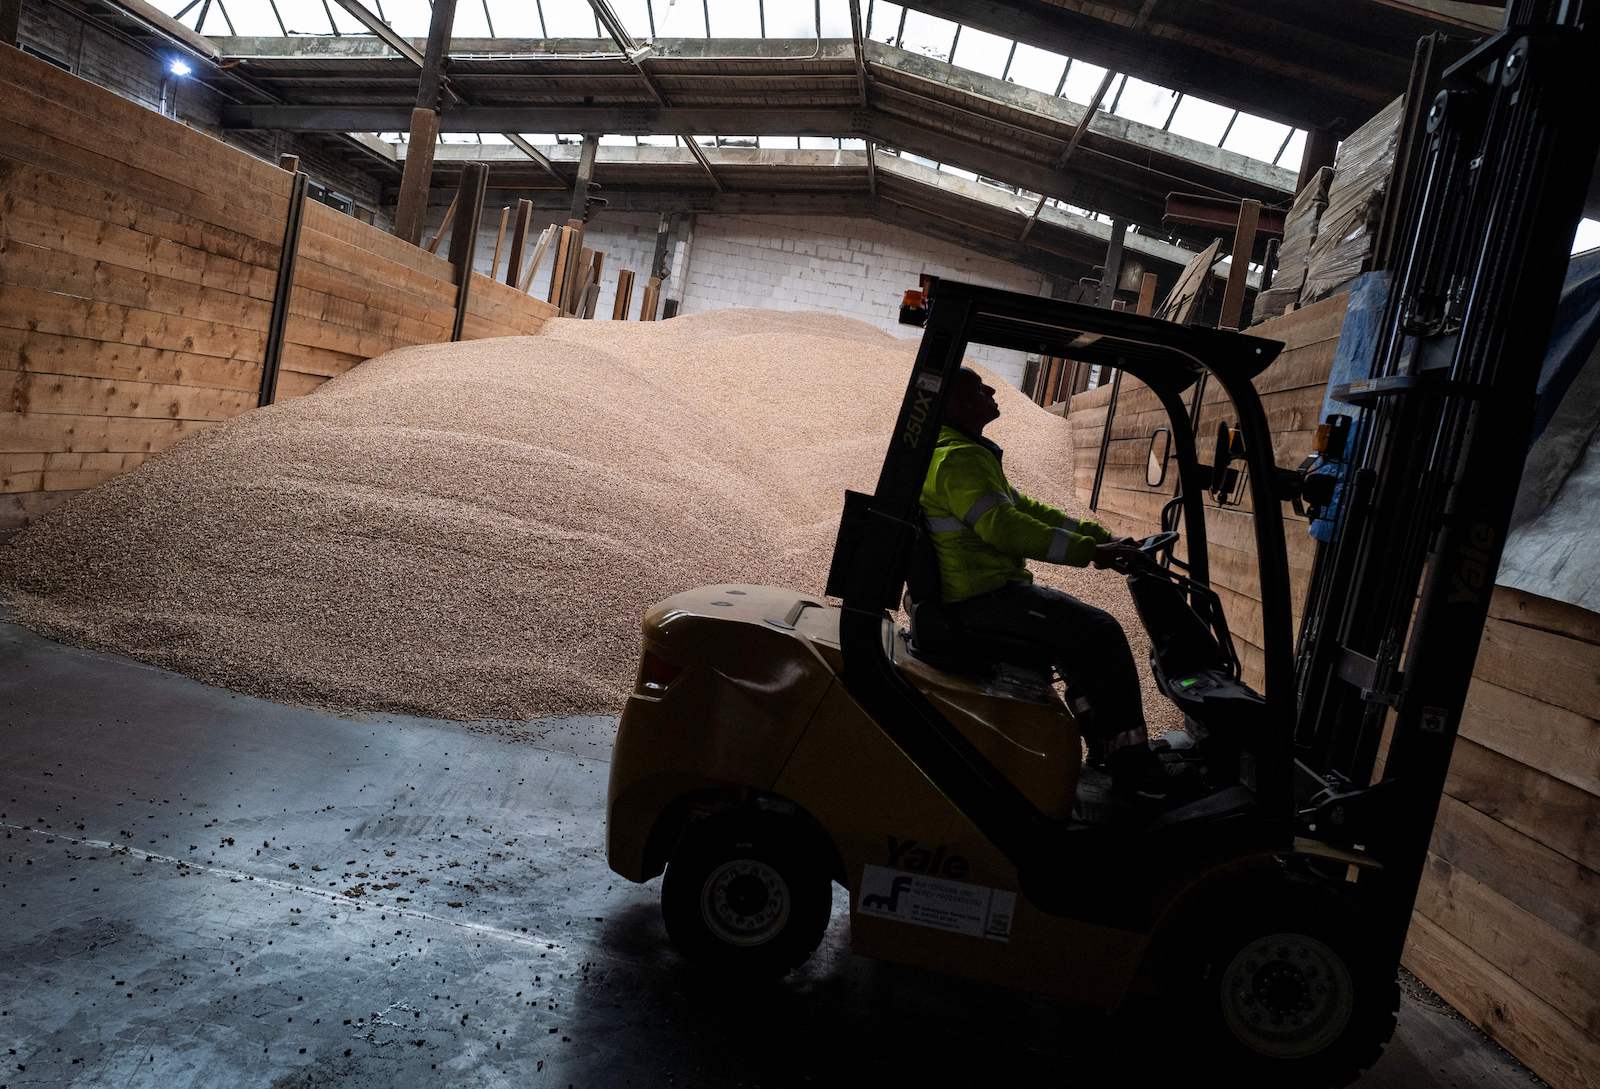 a person drives heavy machinery near a large pile of wood pellets